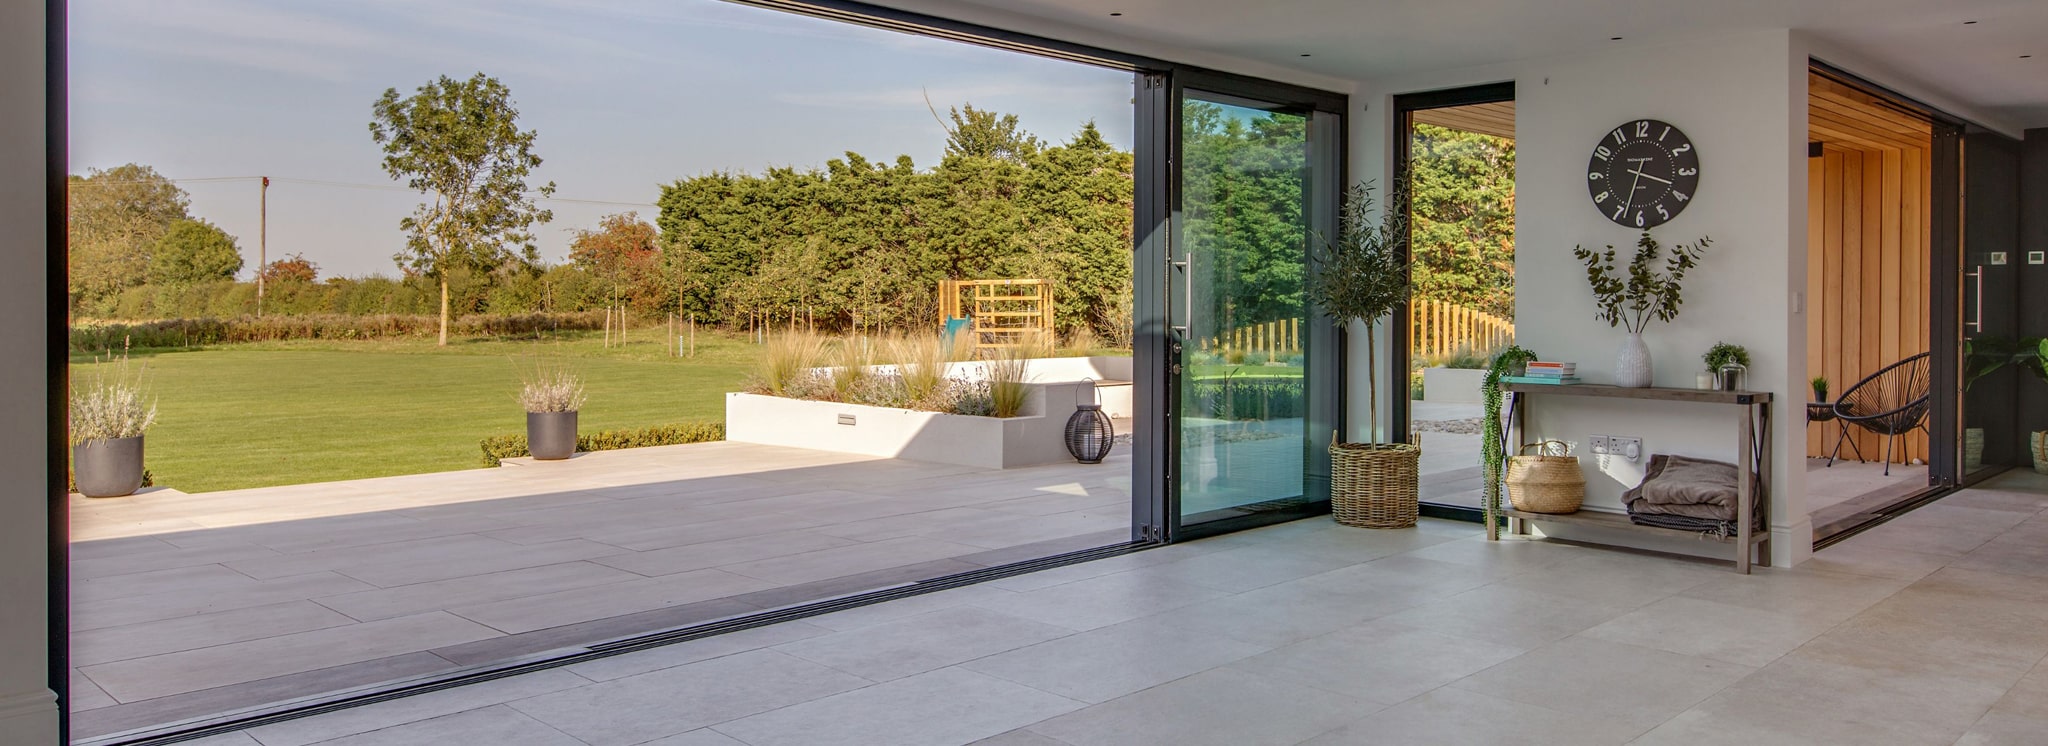 Operating doors in hot weather - FAQs